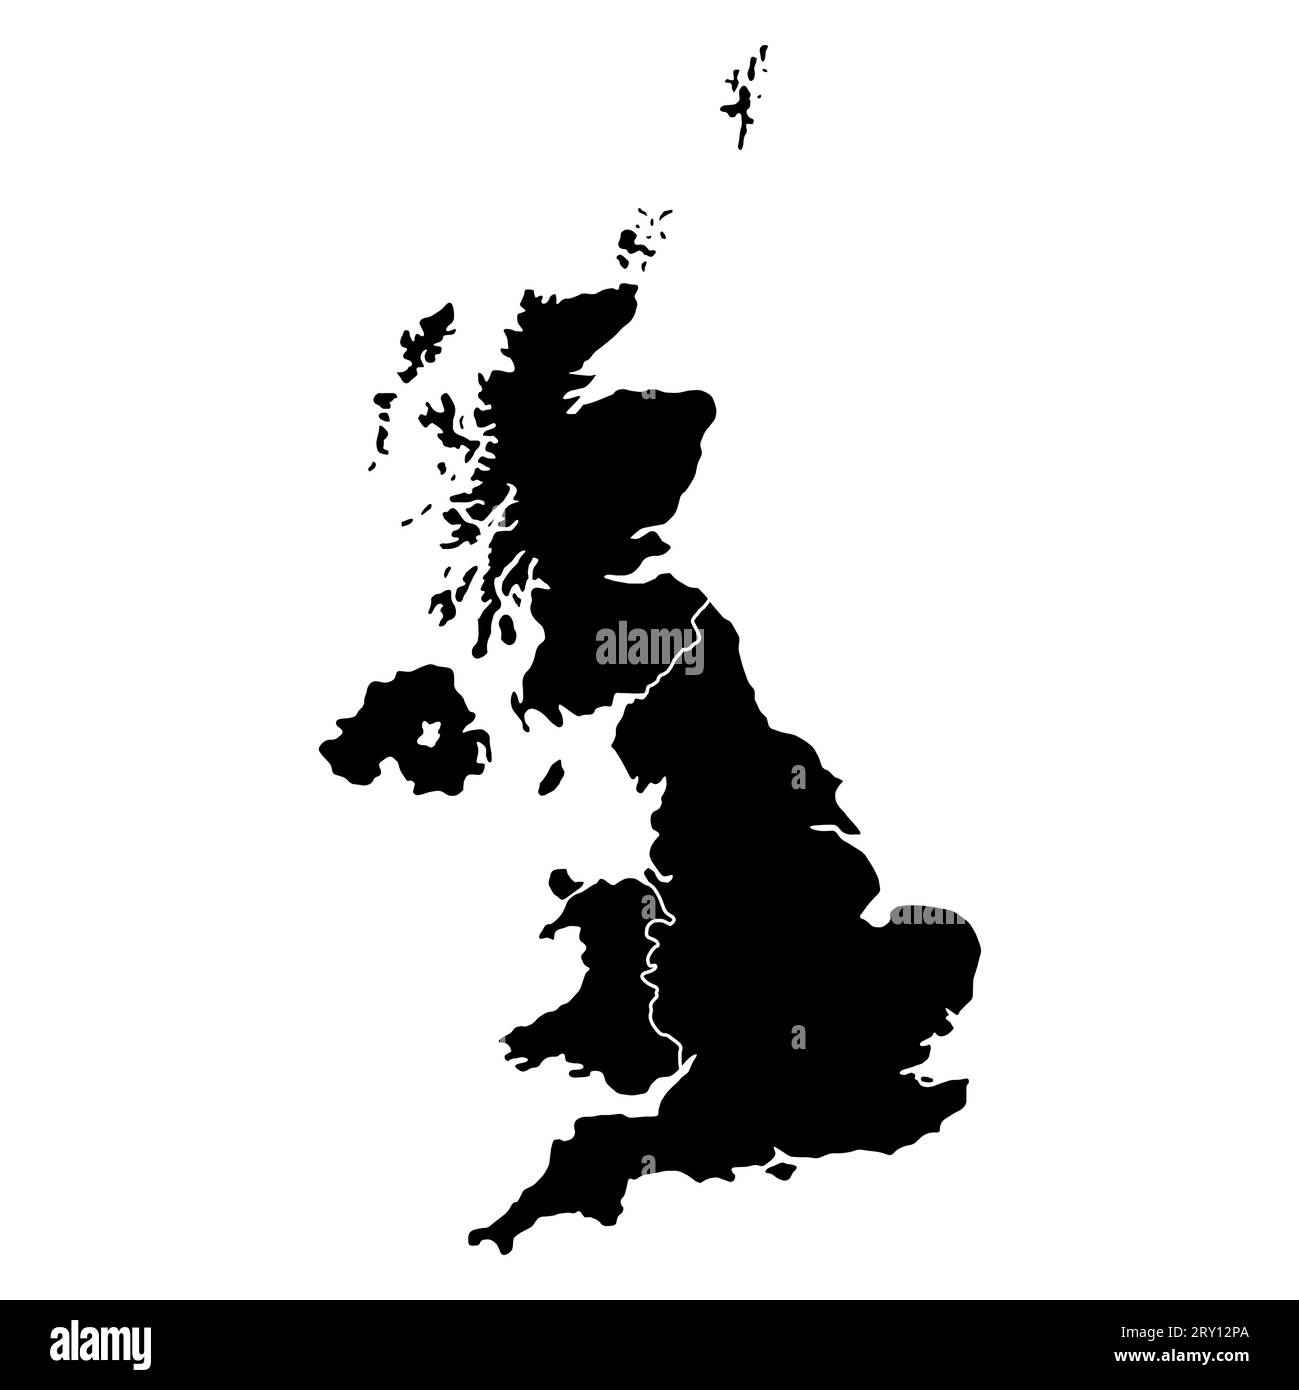 The United Kingdom of Great Britain and Northern Ireland map, detailed web vector illustration . Stock Vector